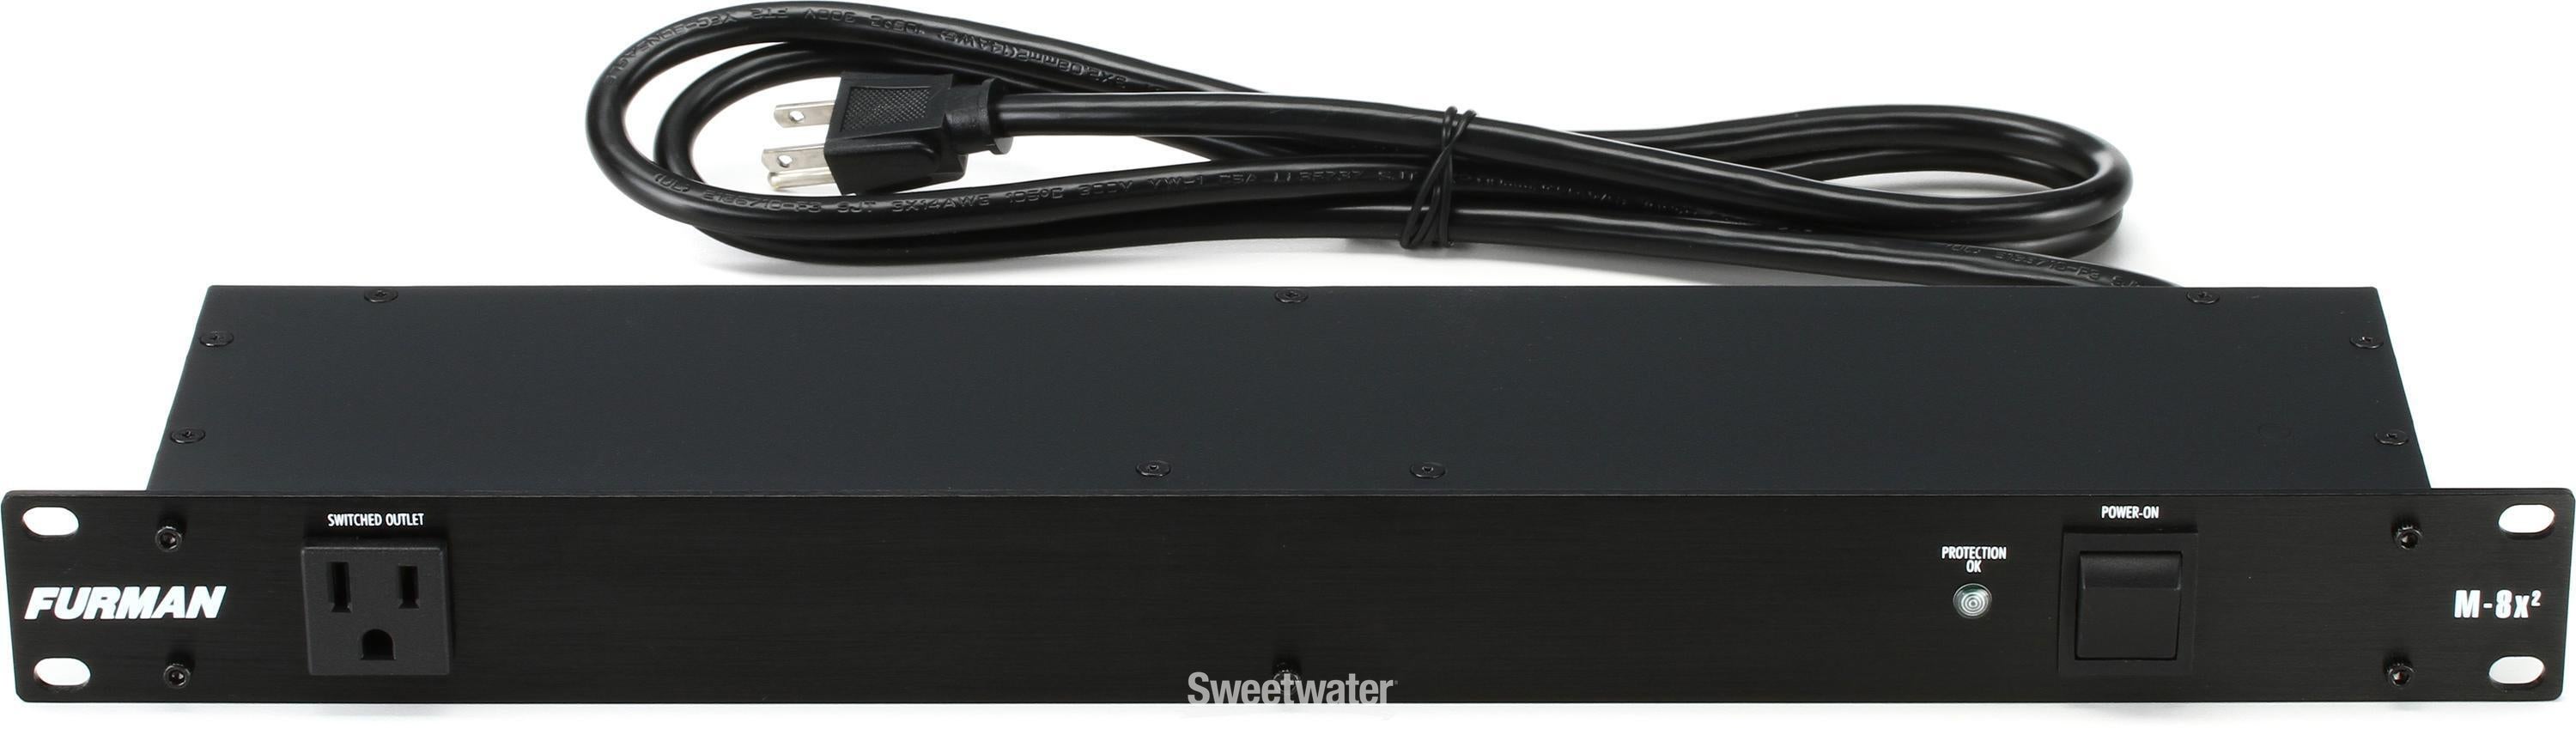 Furman M-8x2 8 Outlet Power Conditioner | Sweetwater